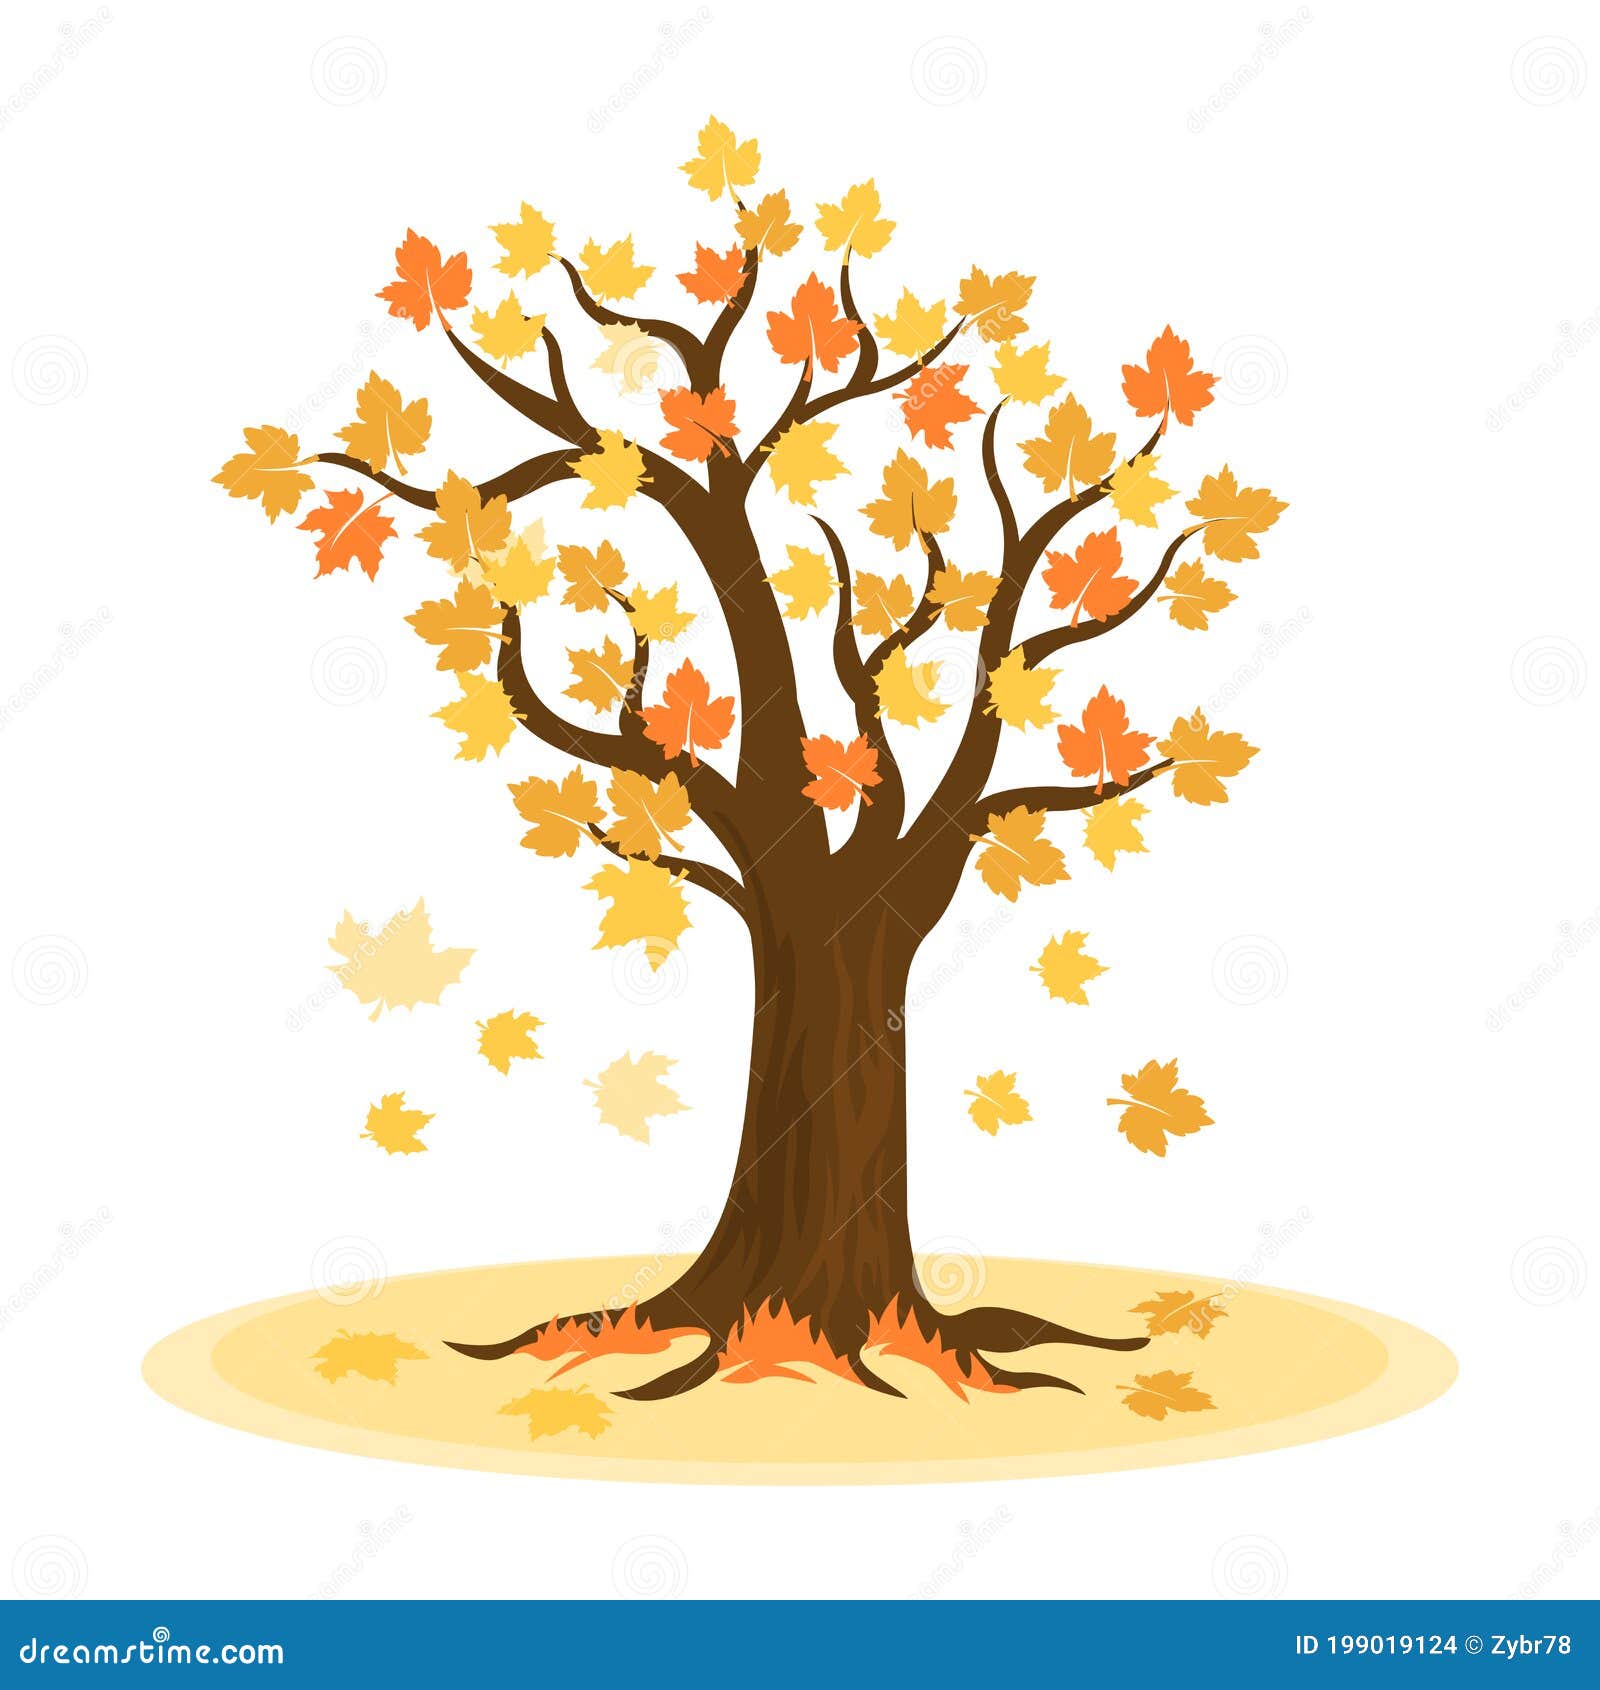 Autumn Tree with Yellow Leaves Stock Vector - Illustration of october,  tree: 199019124